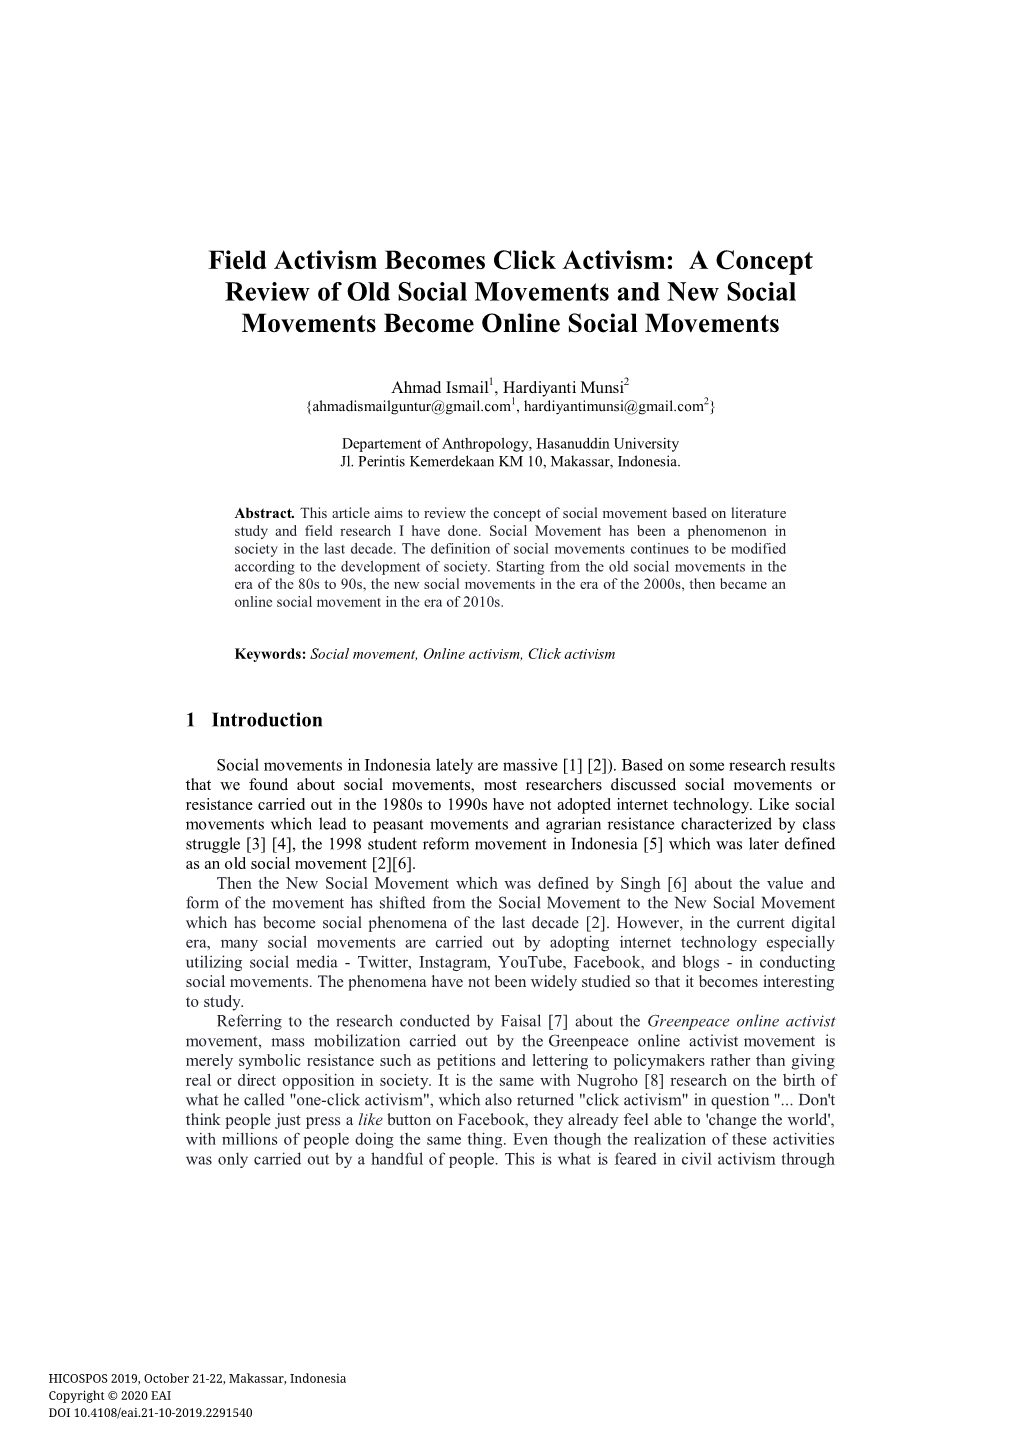 Field Activism Becomes Click Activism: a Concept Review of Old Social Movements and New Social Movements Become Online Social Movements